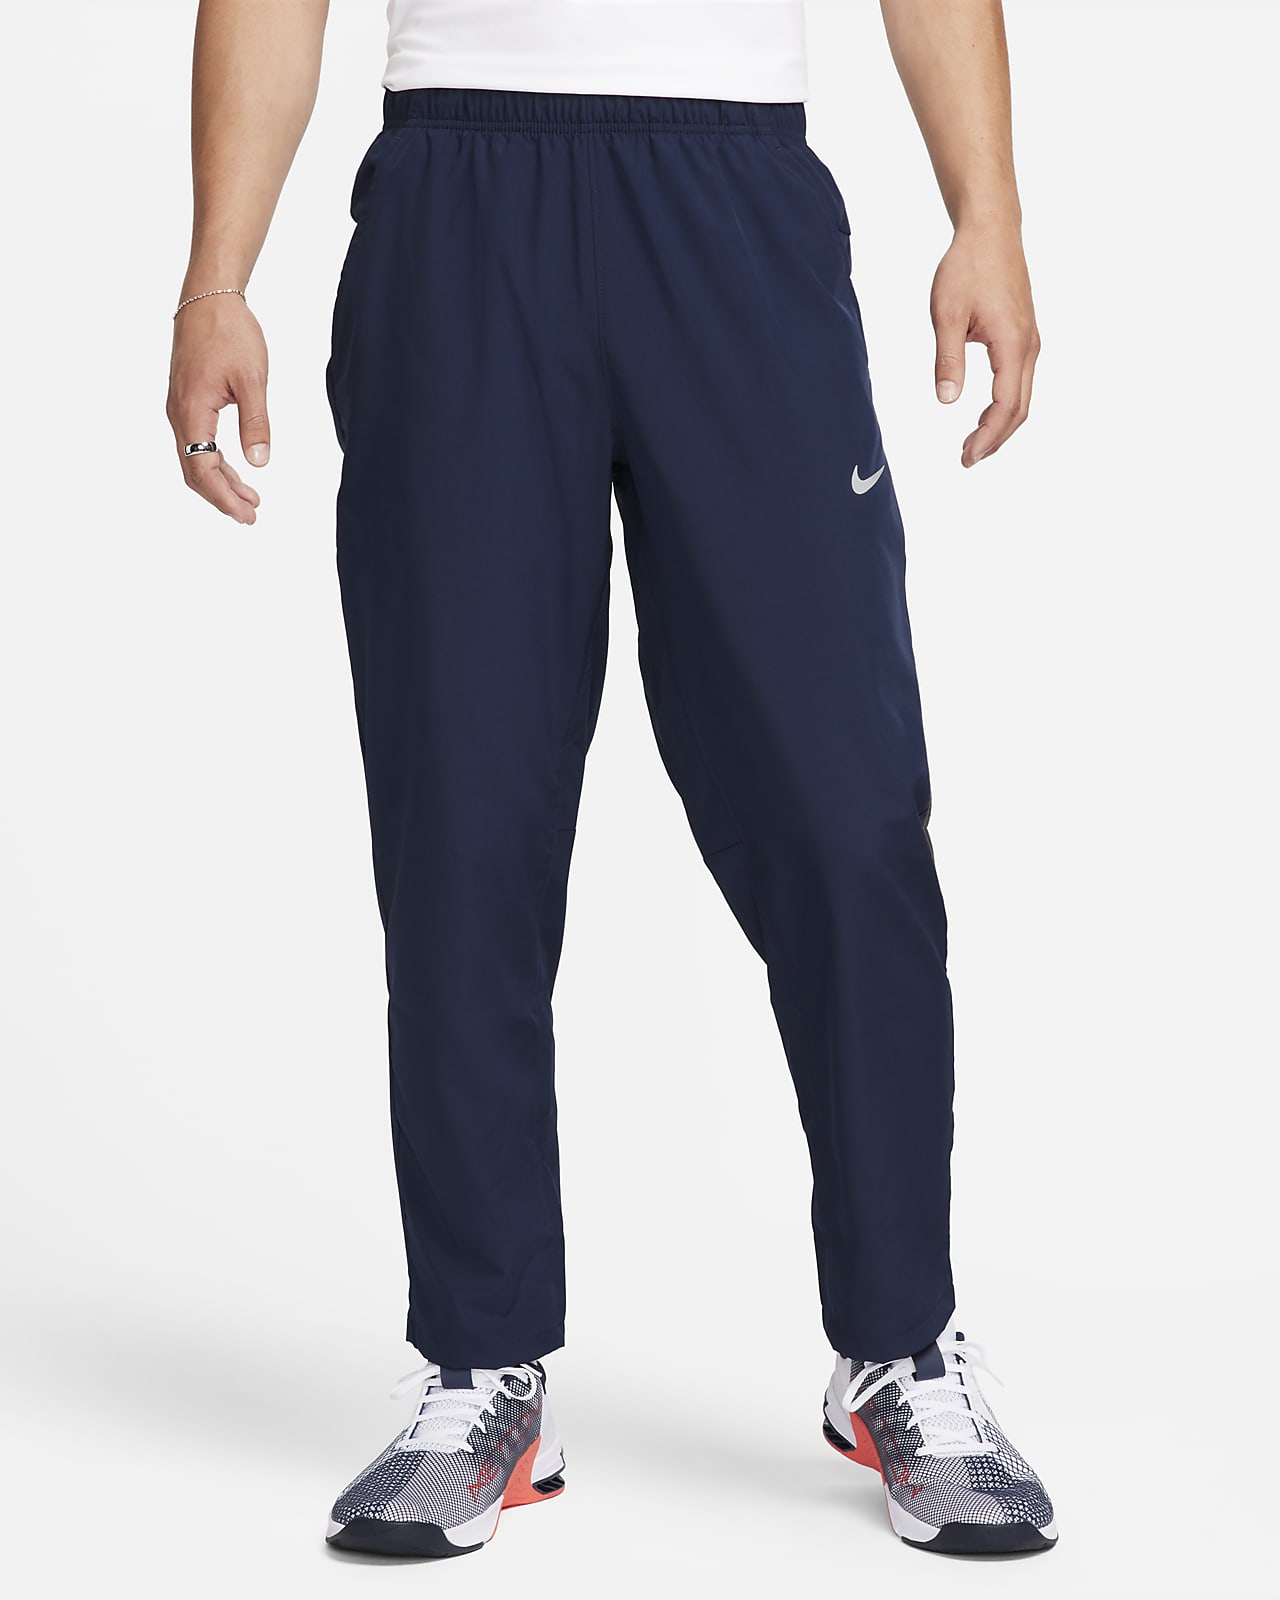 Full Length Dri-FIT Trousers & Tights. Nike IN